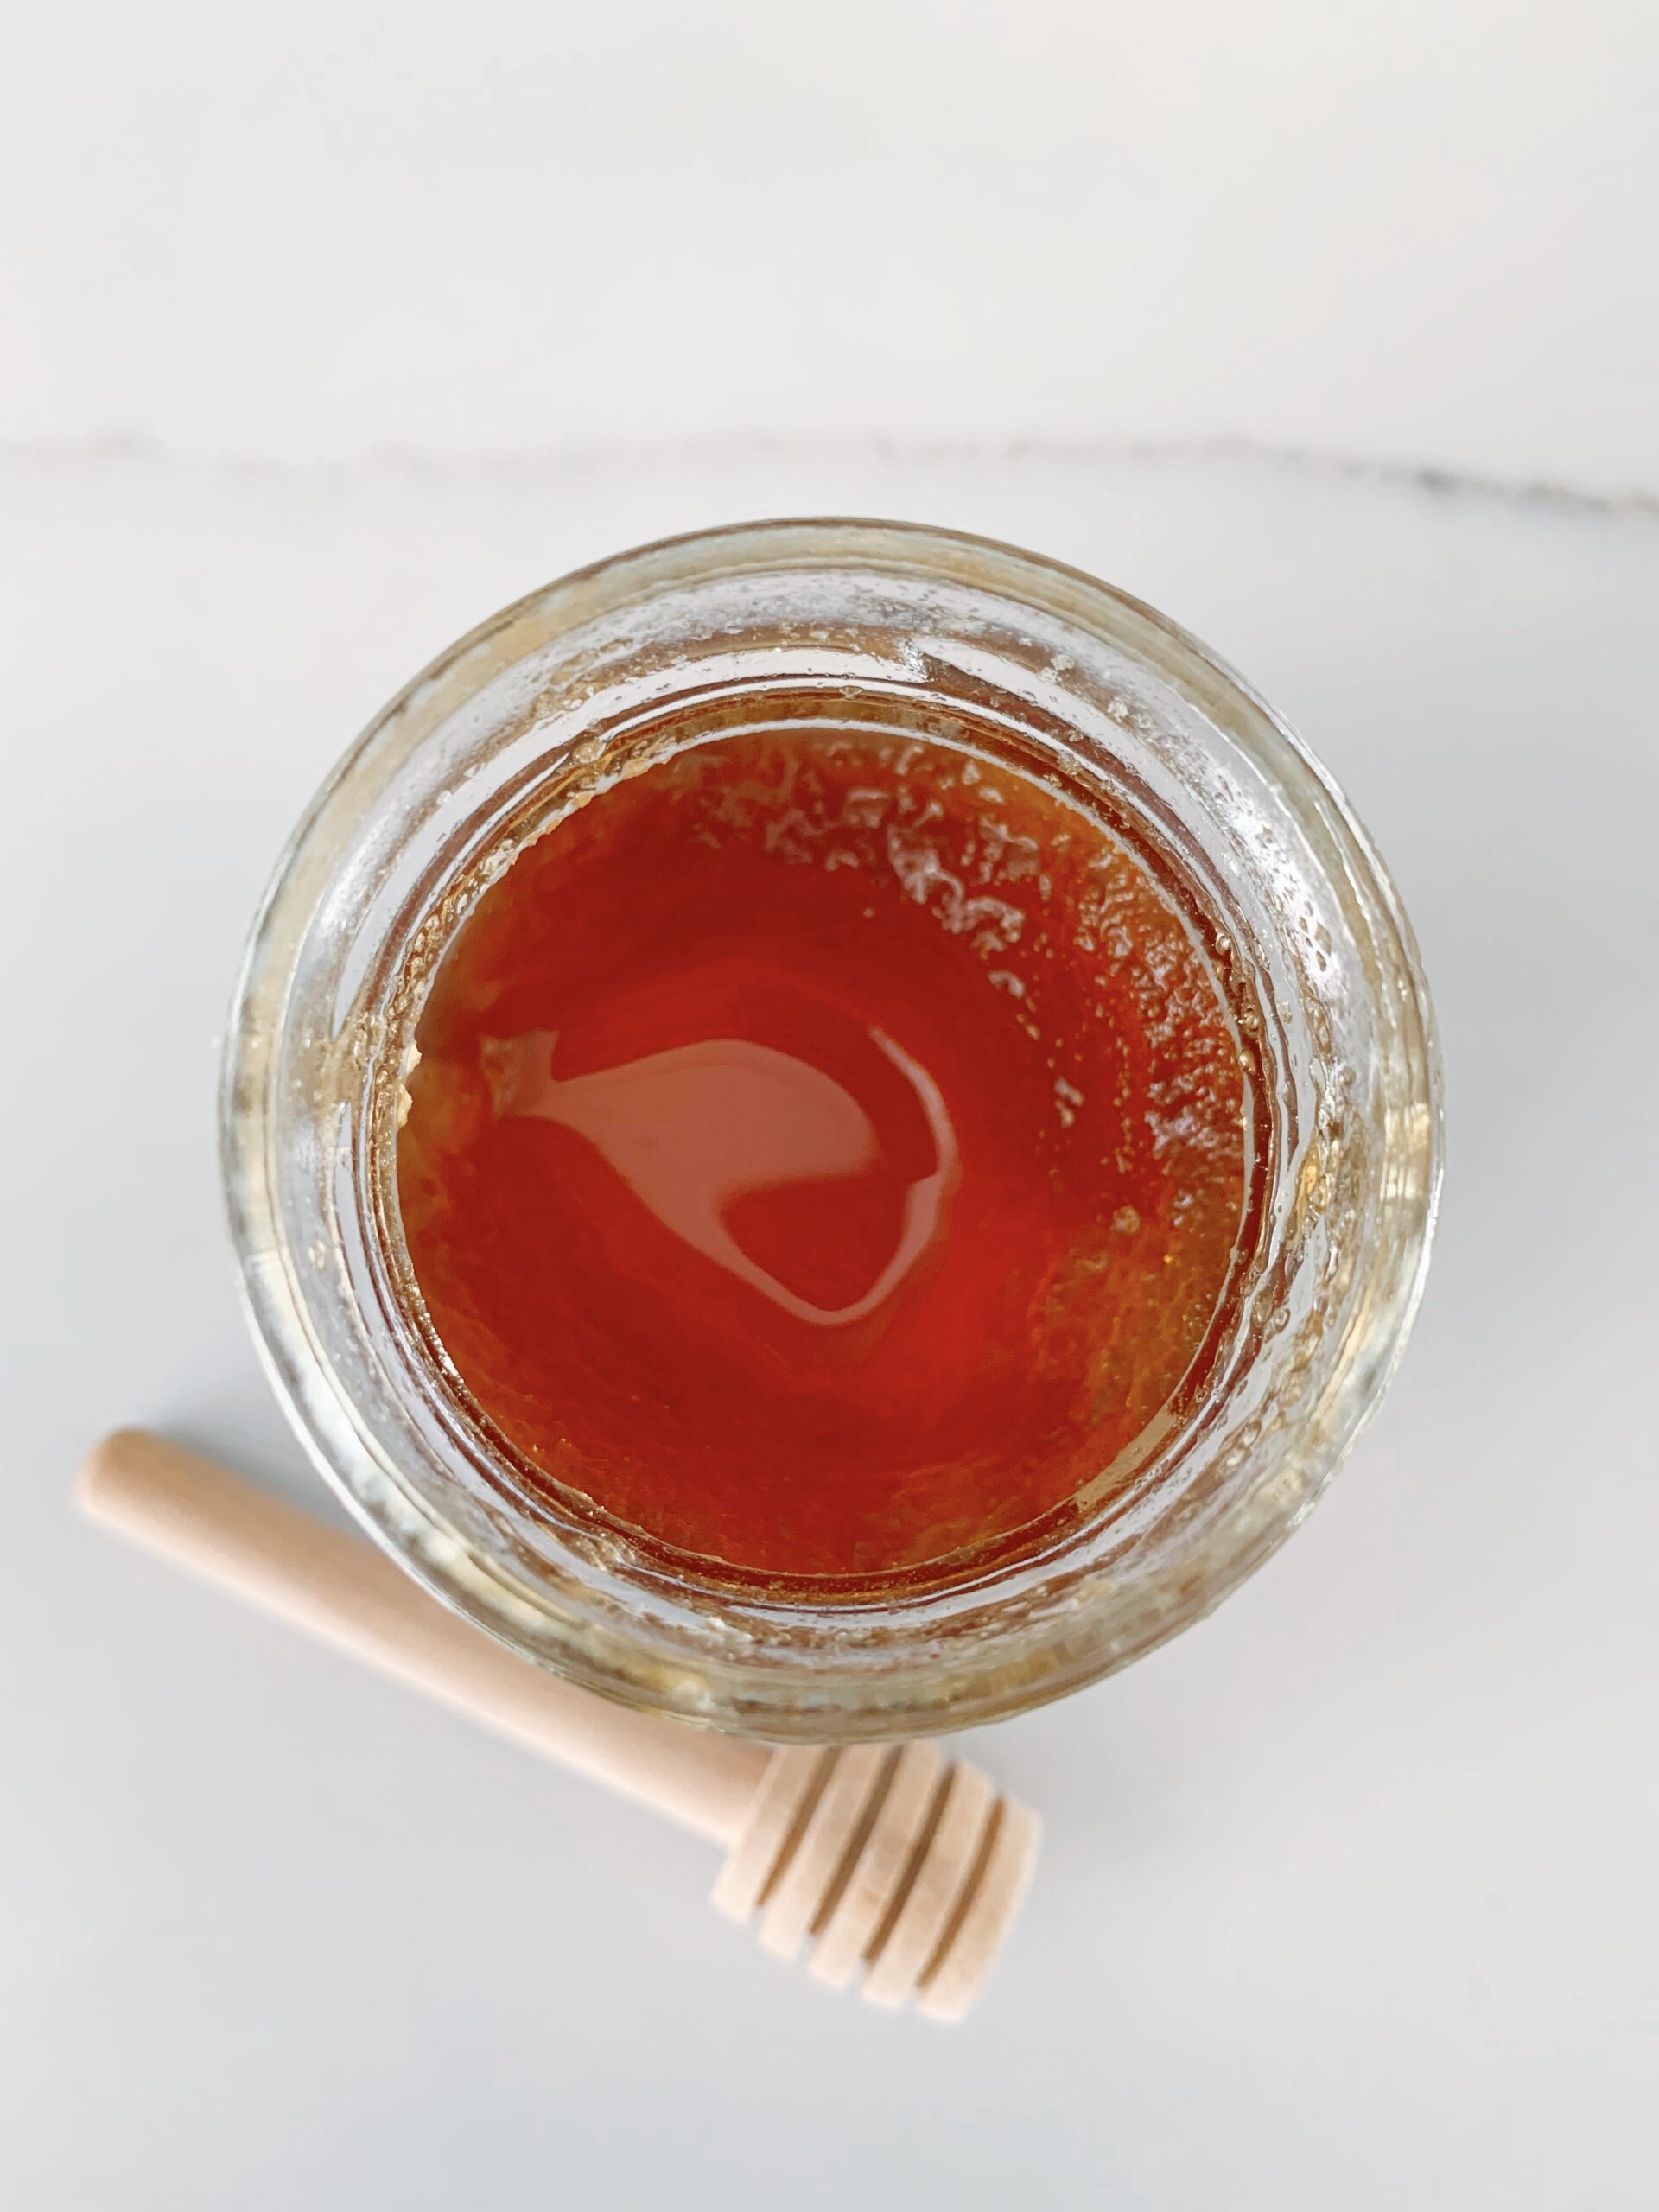 Get ready to transform your skin with this amazing DIY Honey Mask!